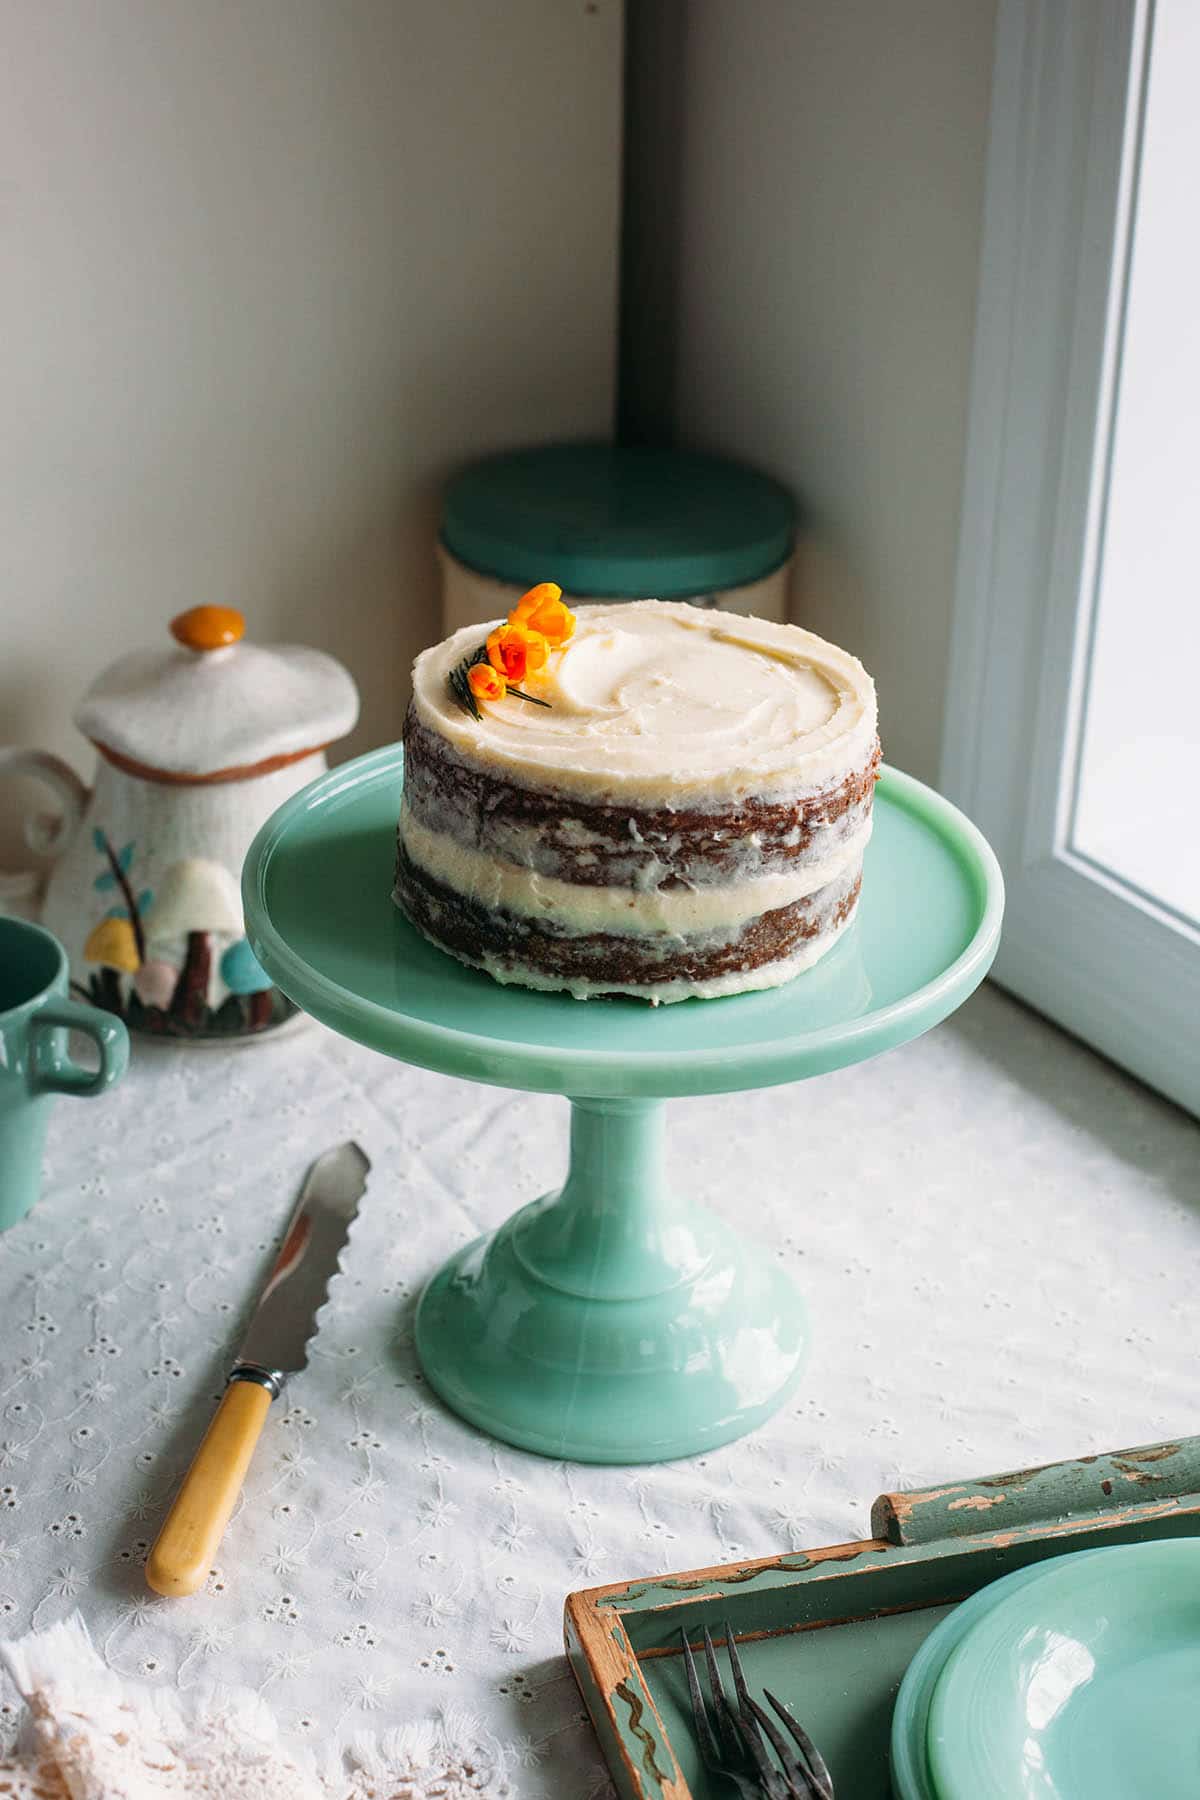 Spiced carrot cake with pineapple on a green milk glass stand.